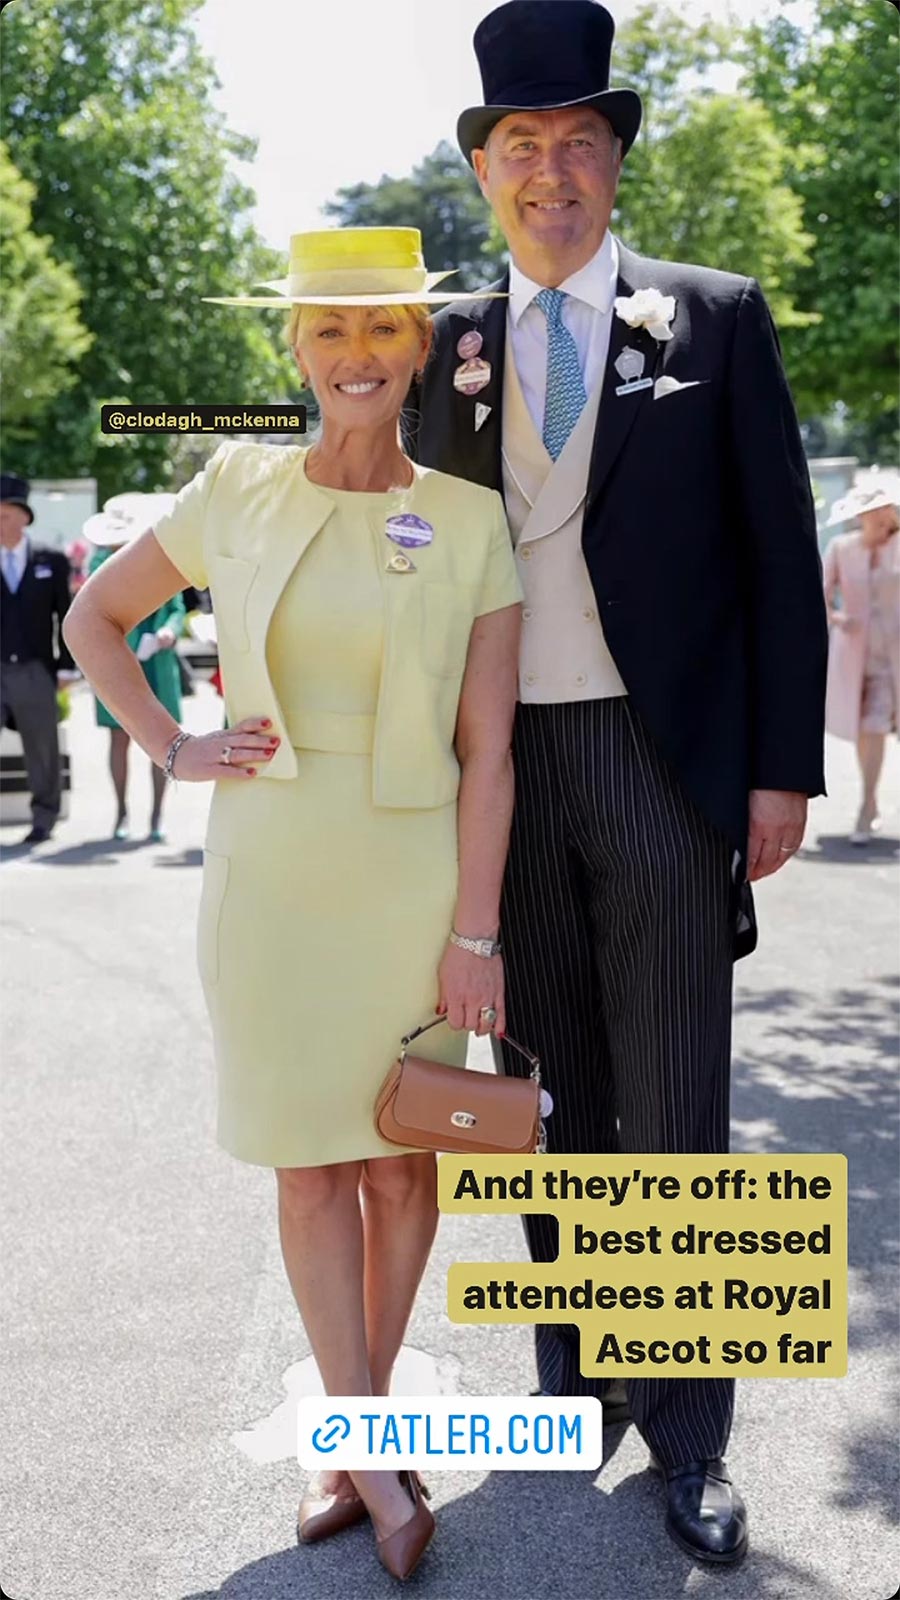 Tusting-at-Ascot-Clodagh-Best-Dressed